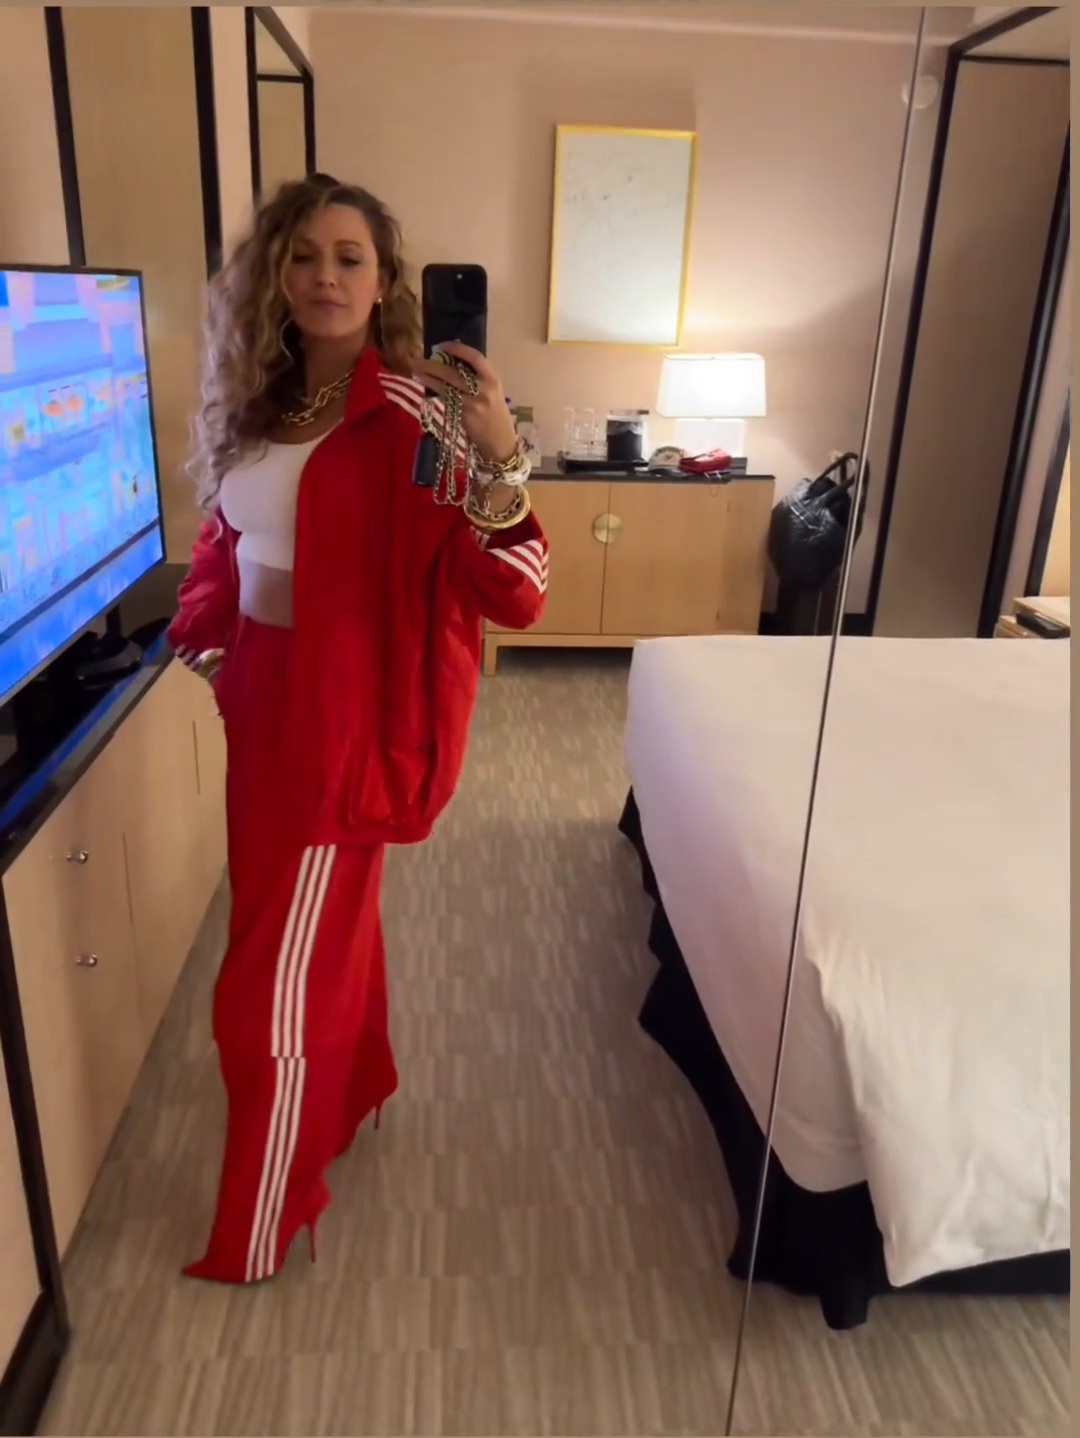 Blake Lively Broke the Internet With Her Super Bowl Outfit! - Photo 4